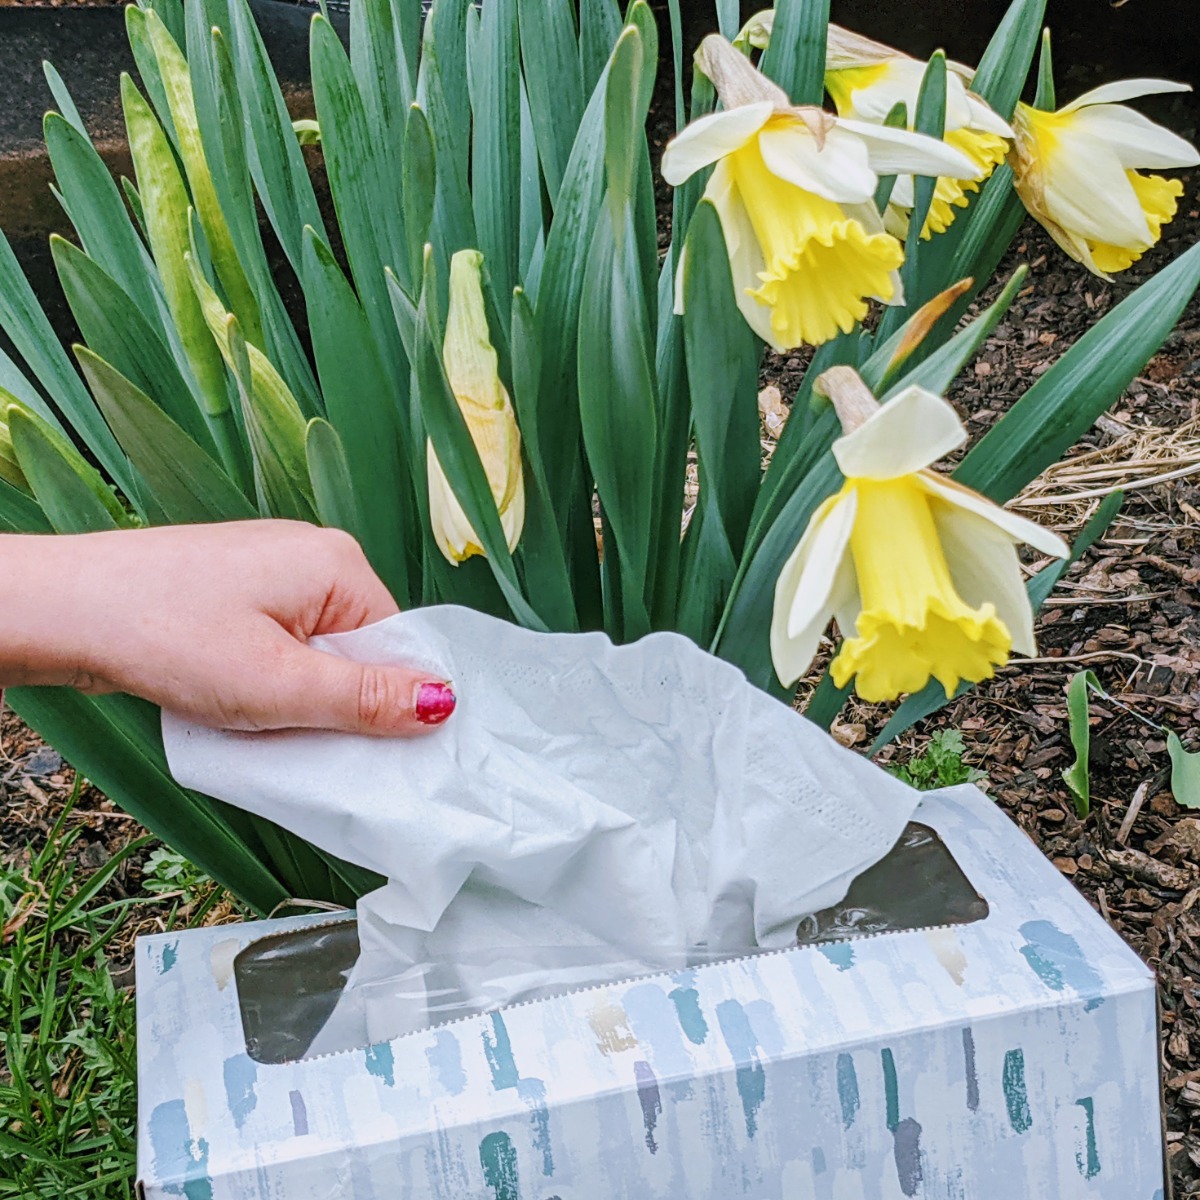 Tissues by Flowers - Dealing with Spring Allergies in the Garden